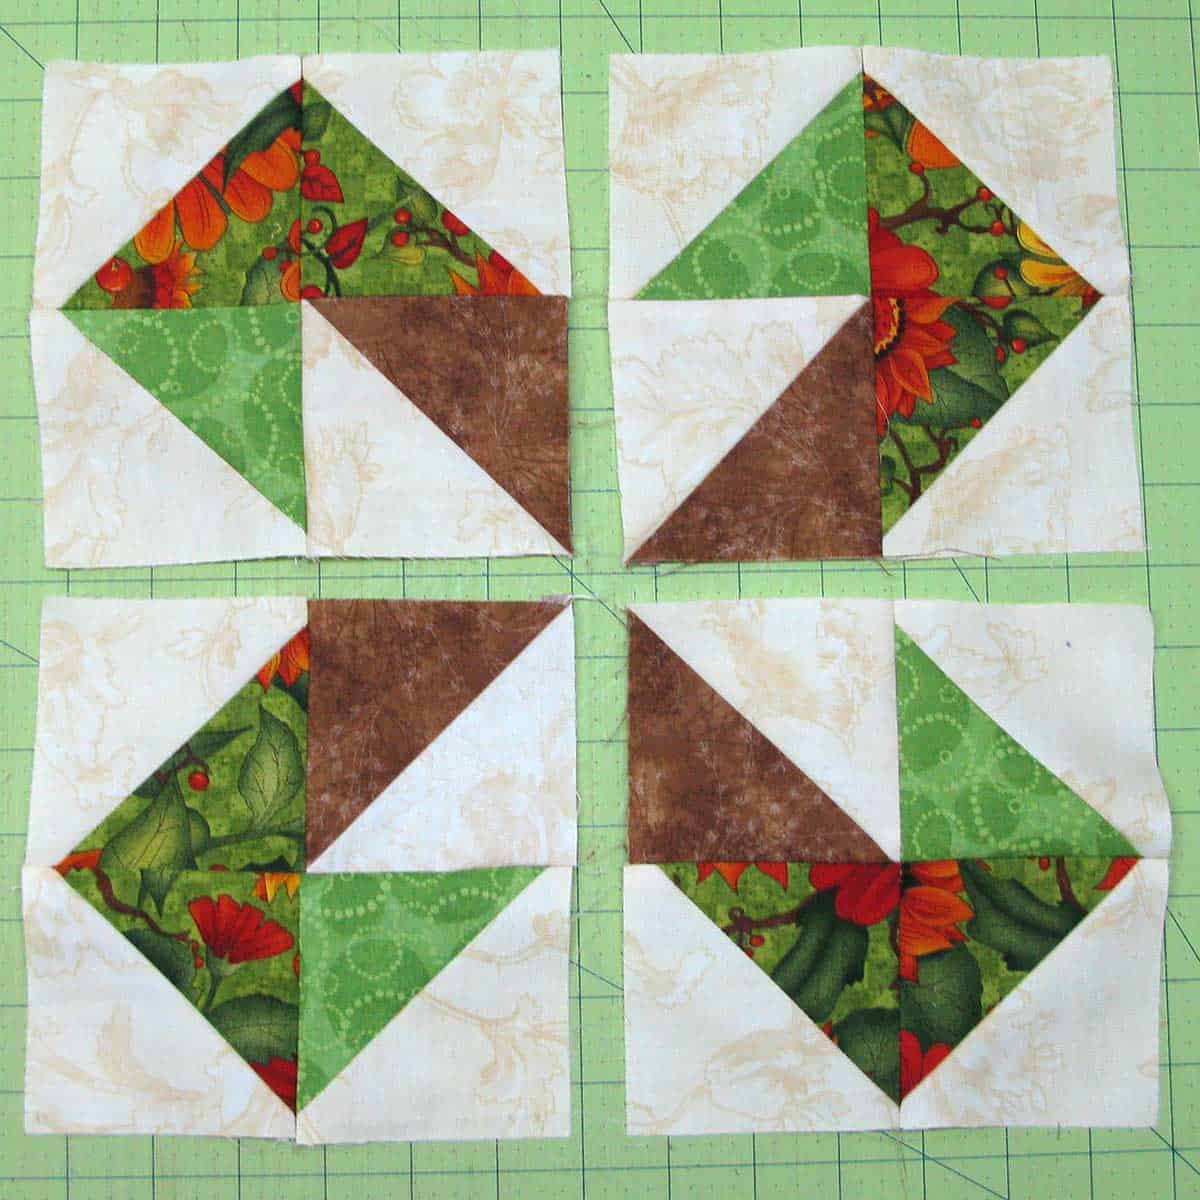 Pillow block in two sections